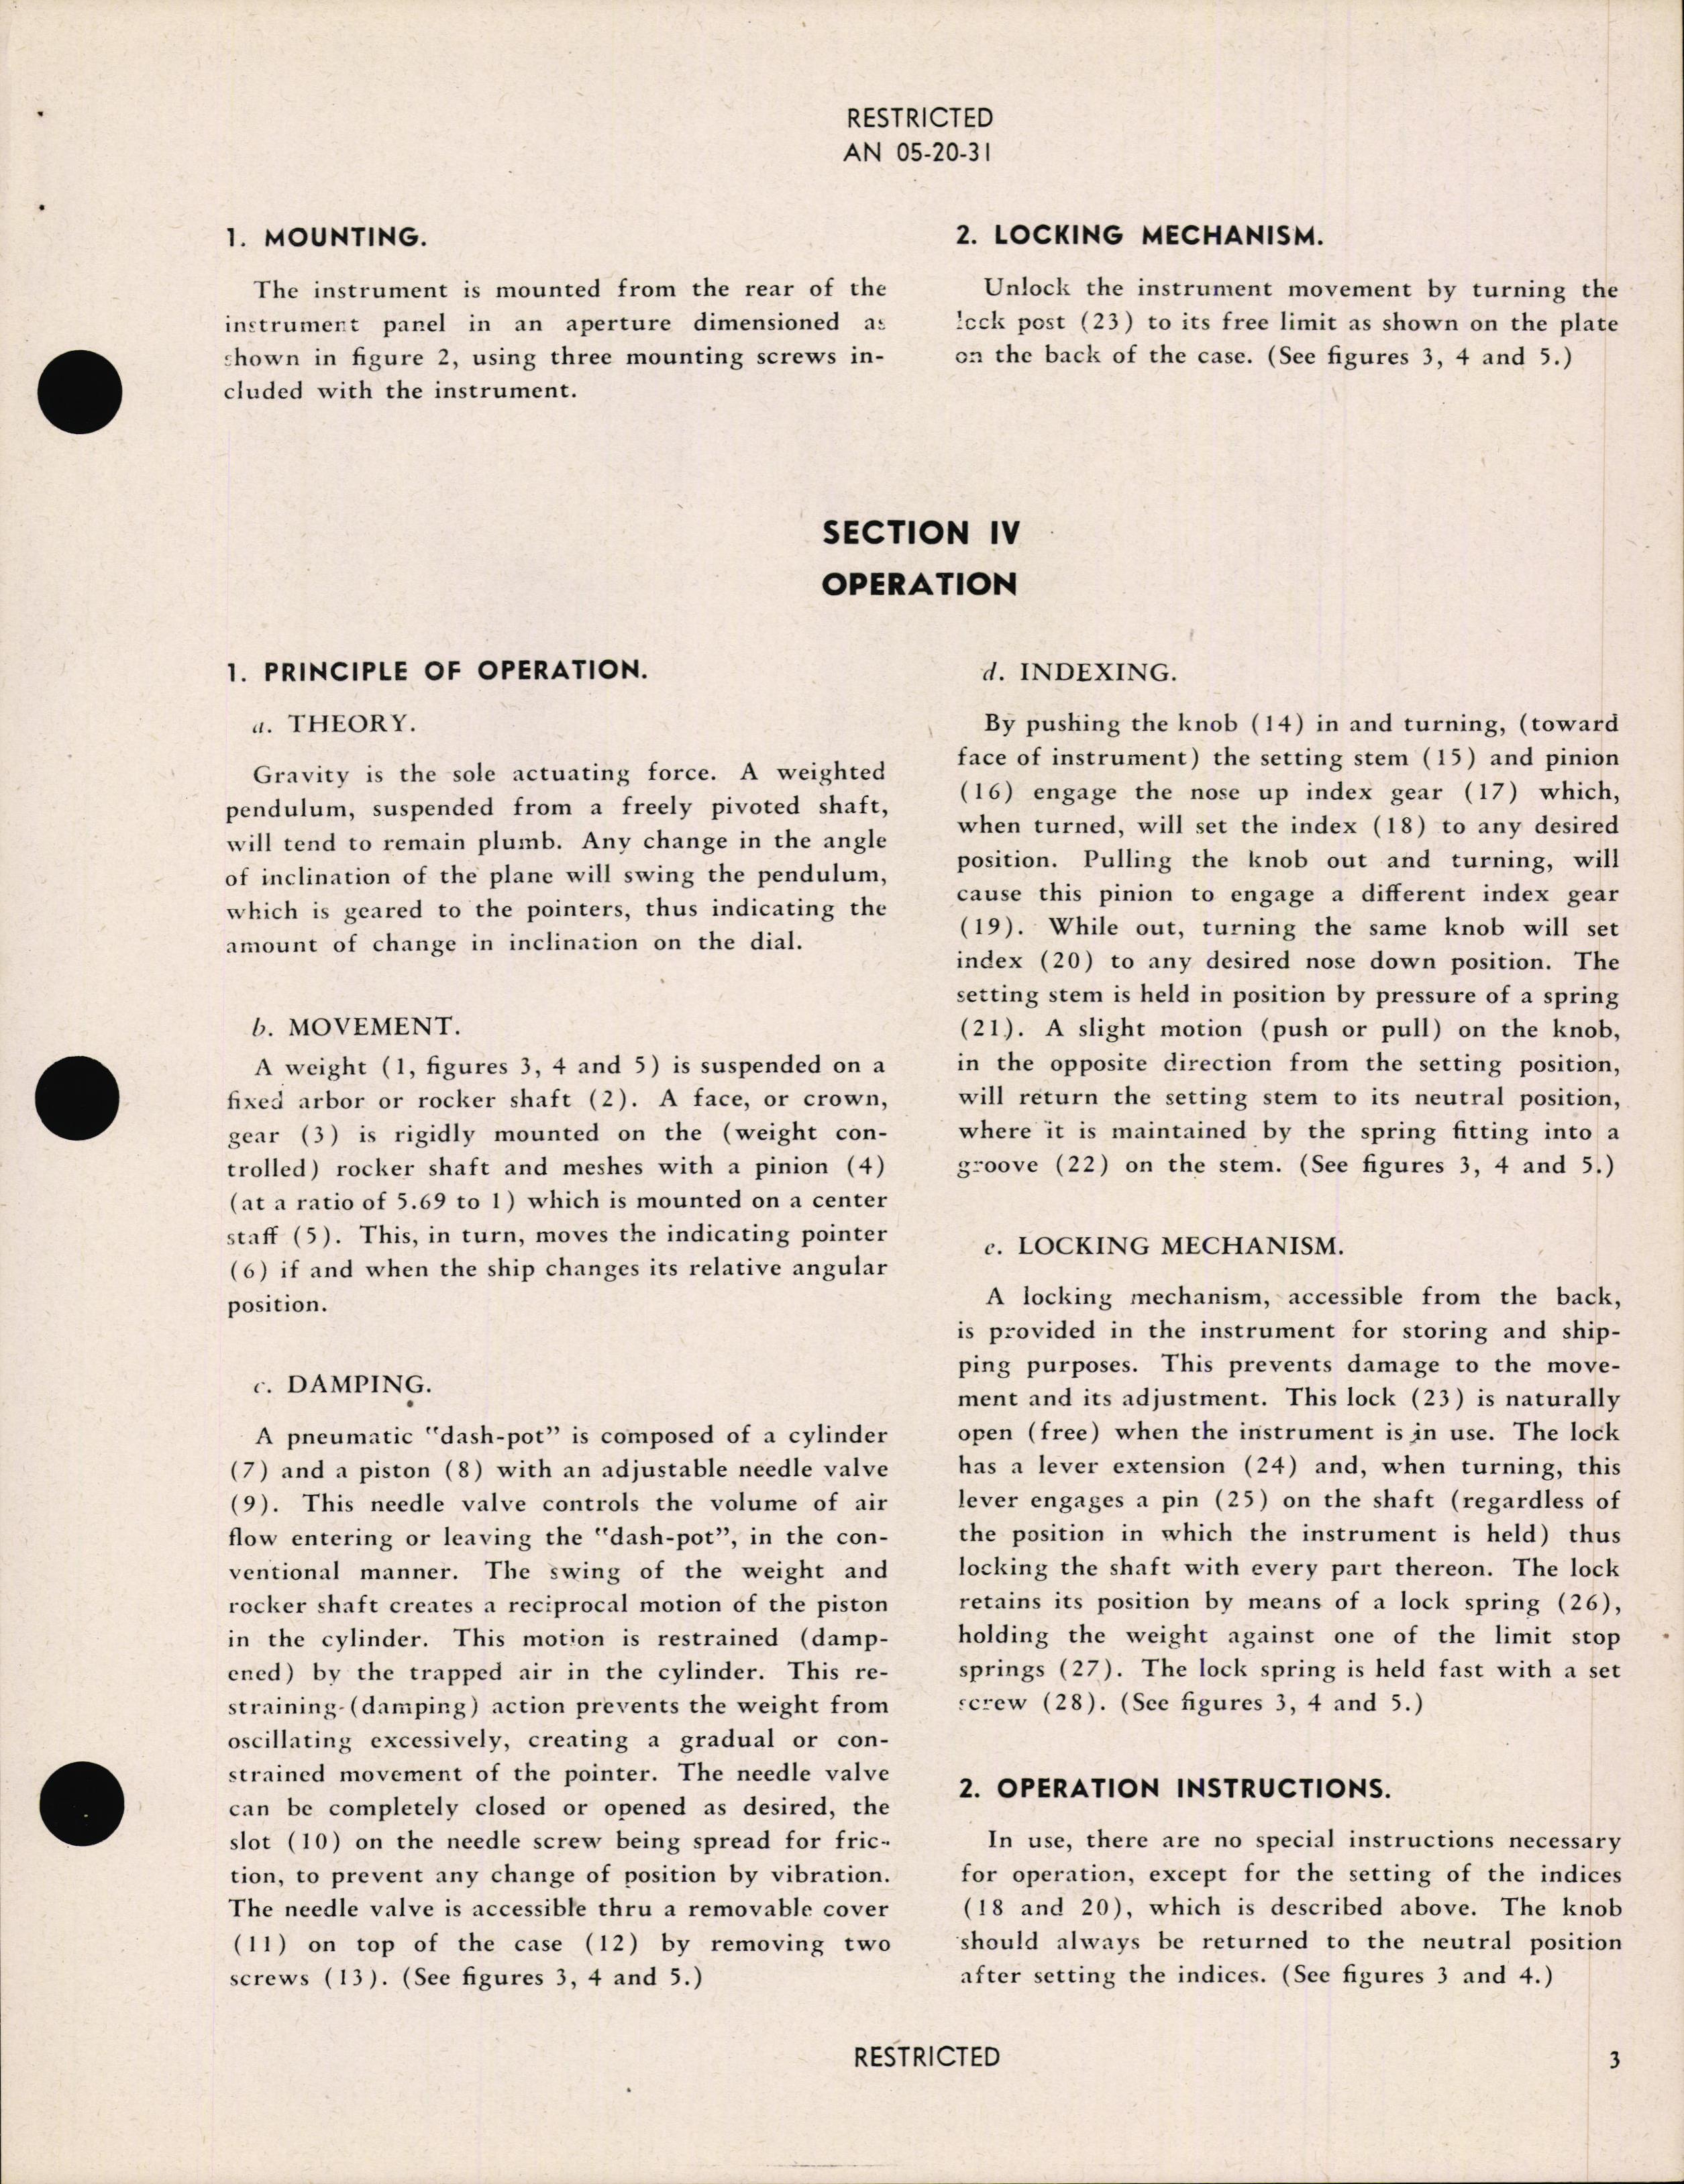 Sample page 9 from AirCorps Library document: Handbook of Instructions with Parts Catalog for Type B-2 Inclinometer